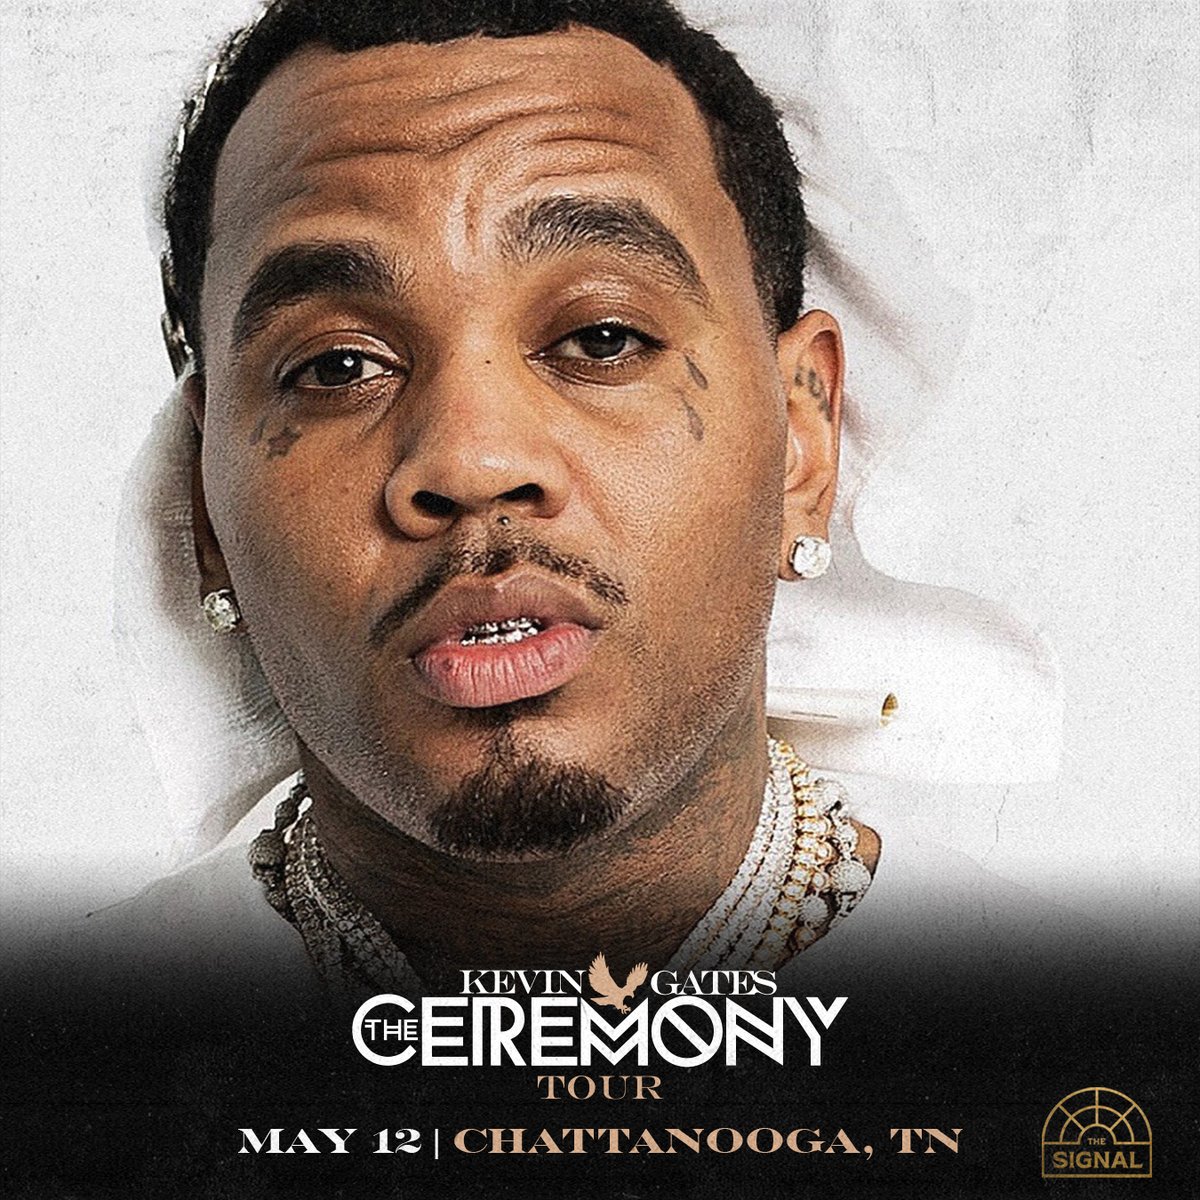 Tickets for @iamkevingates are on sale now! Bringing his new album 'The Ceremony' live to @thesignaltn in Chattanooga, #TN. Be there on May 12 for a special Mother’s Day show! 🎟️: bit.ly/3WvmlJU